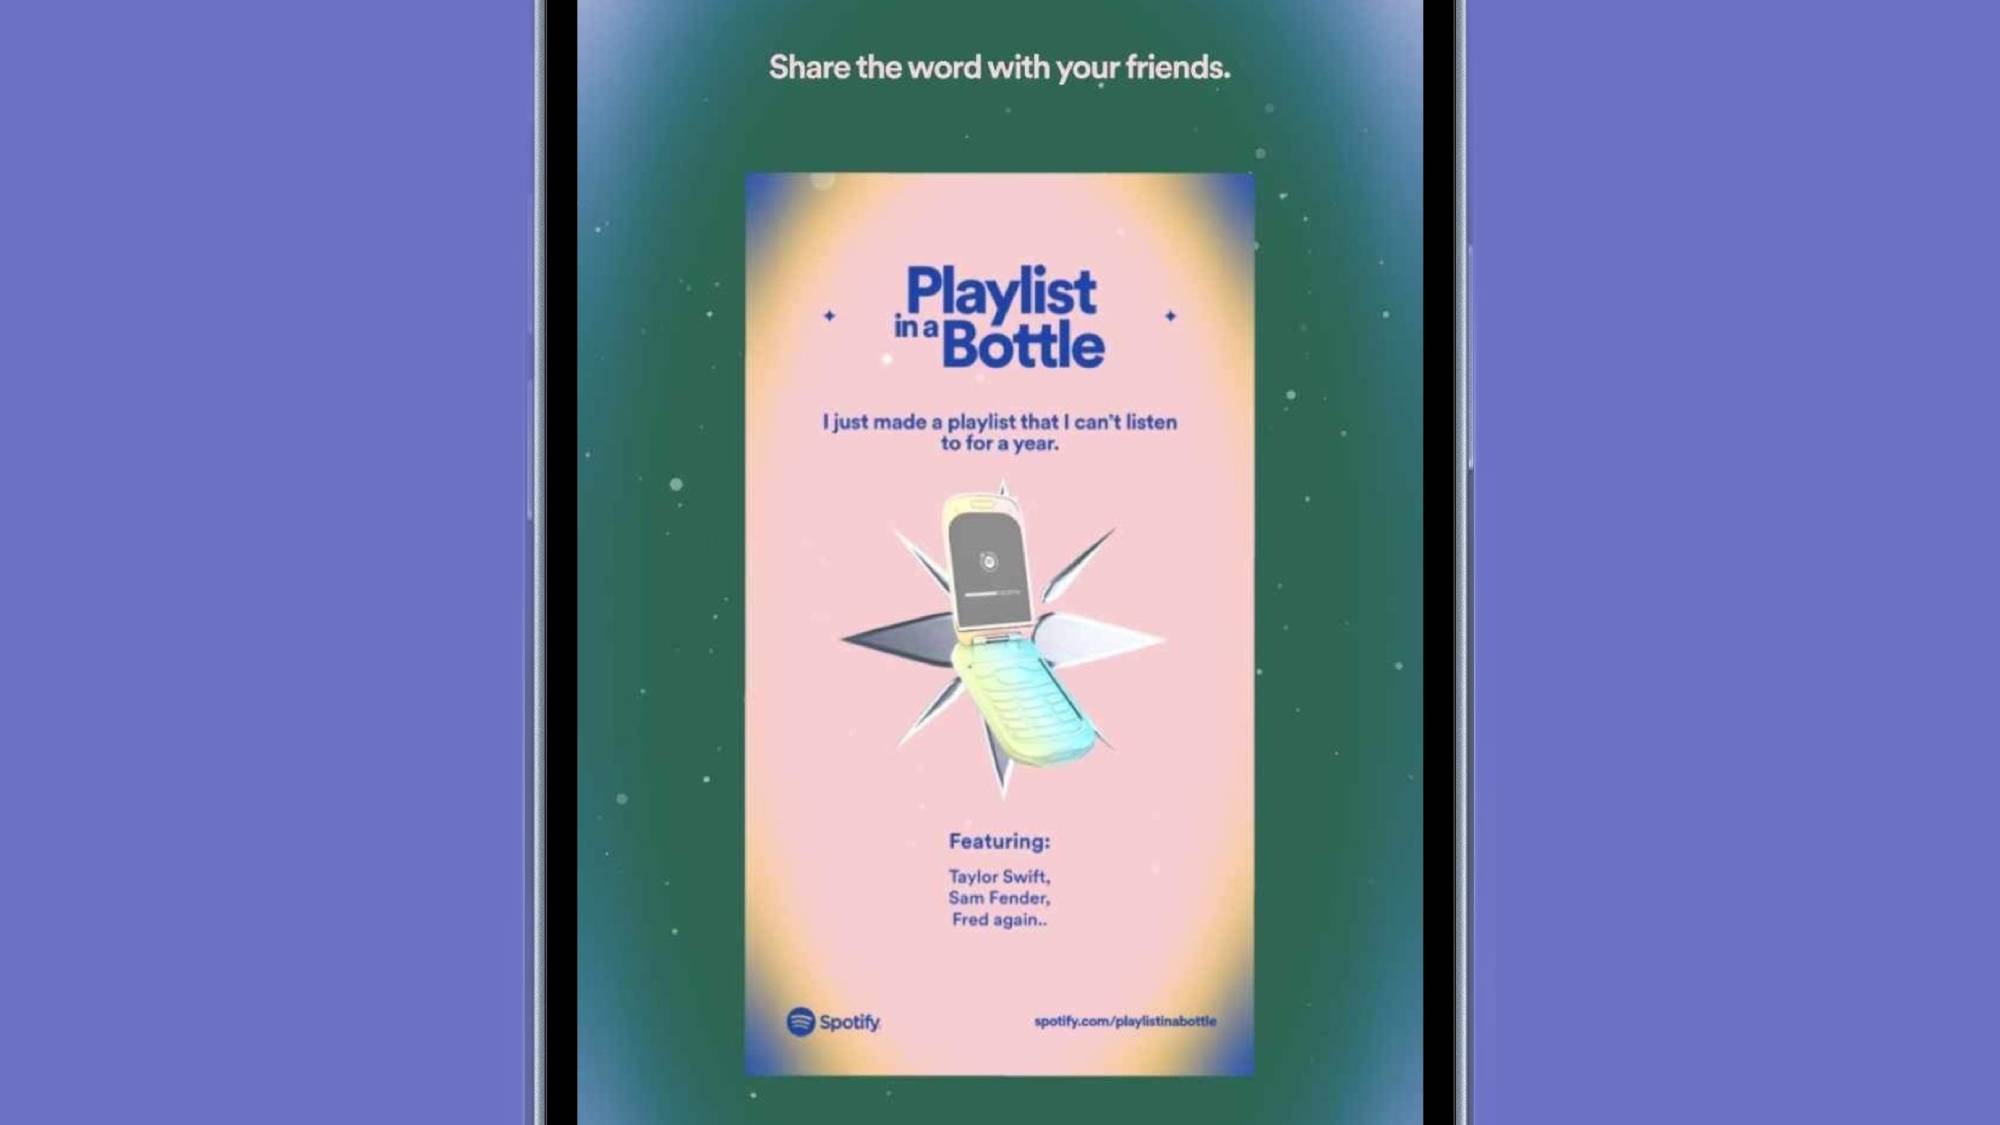 Bottle your completed playlist